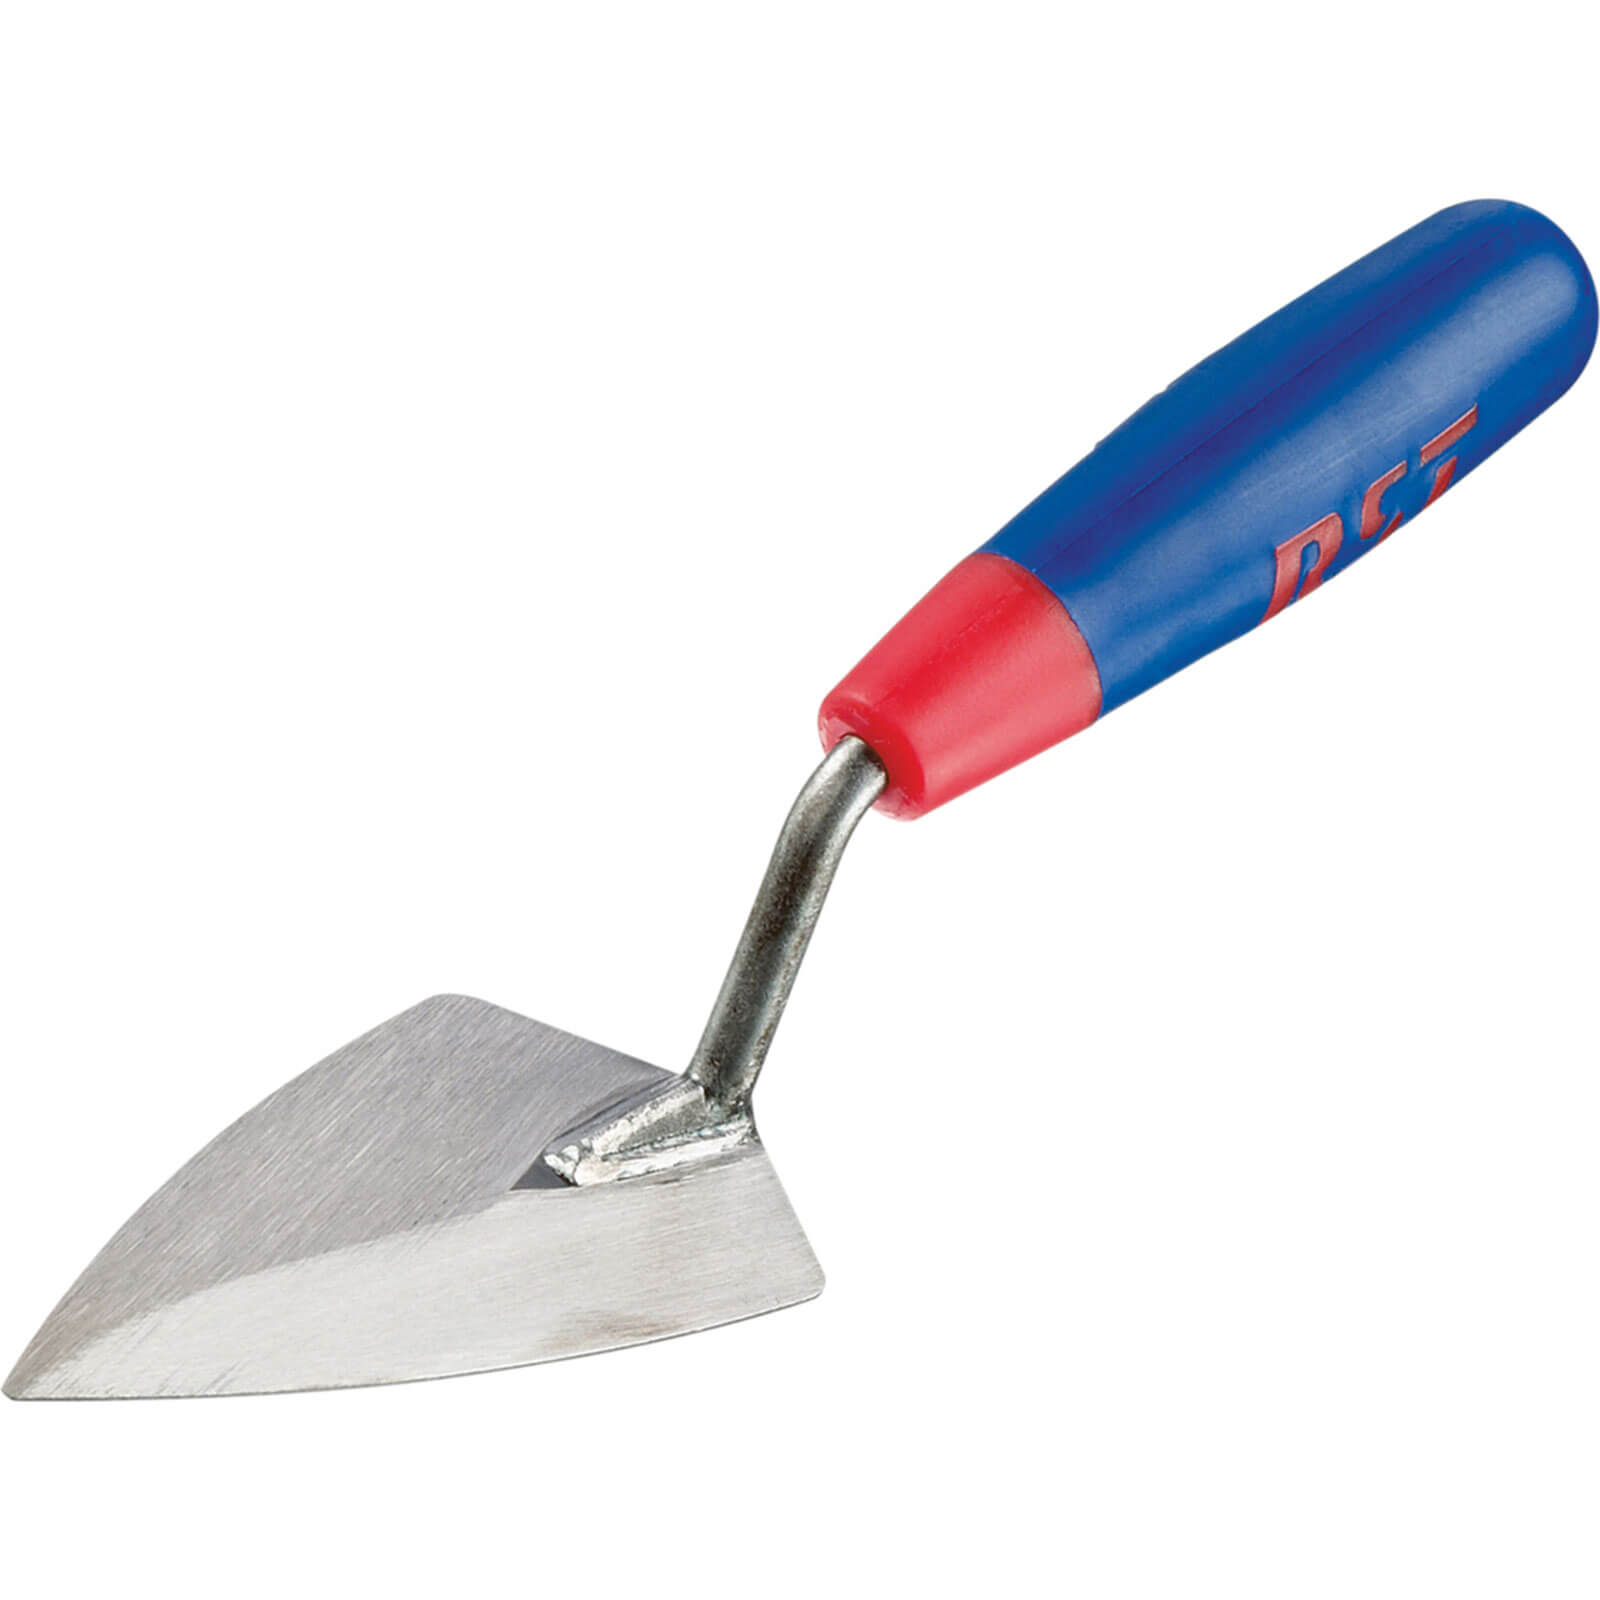 Rst Soft Touch Point Trowel 5" Rtr10105S